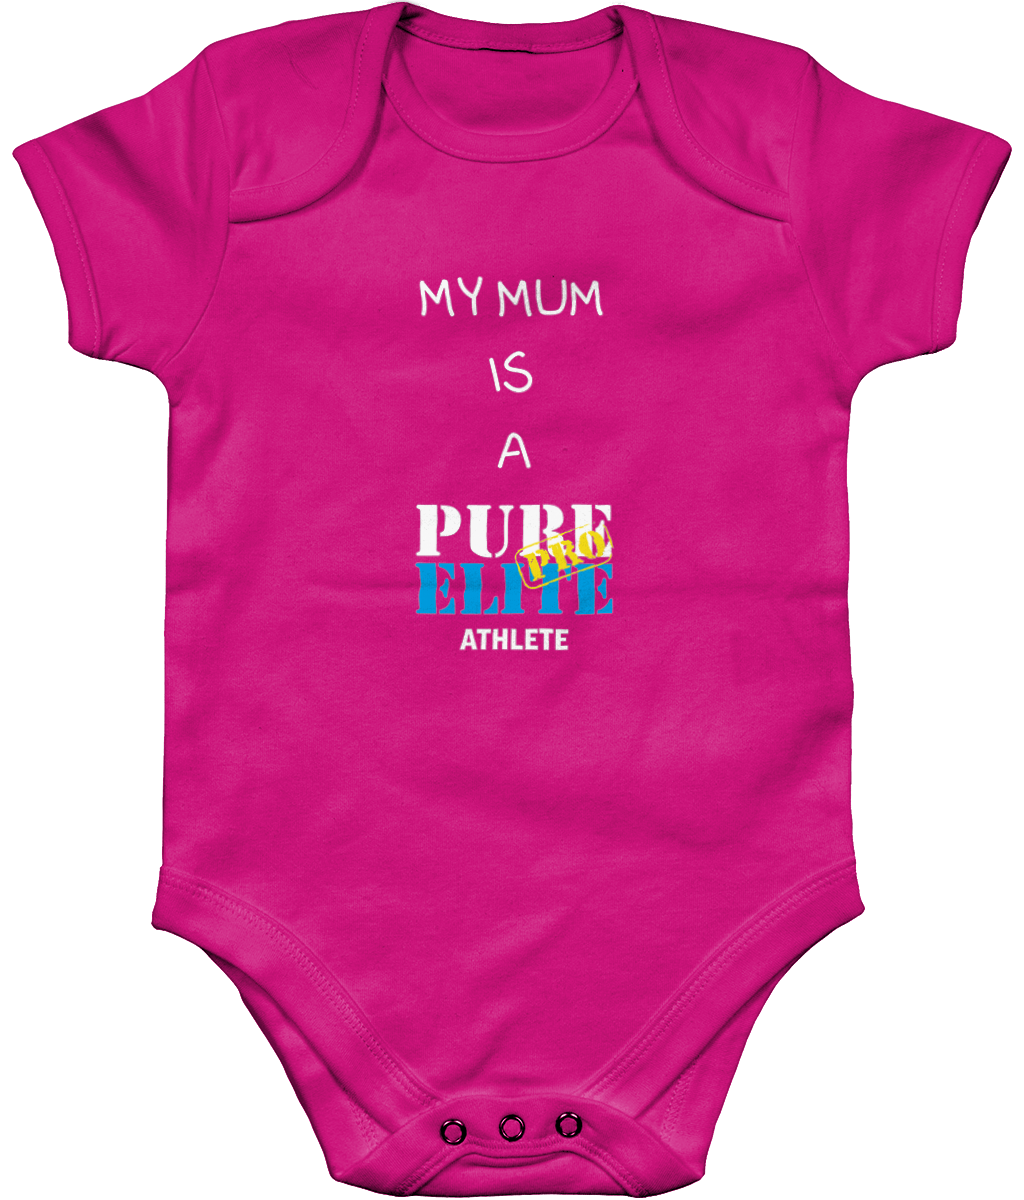 Baby Suit - My mum is a Pure Elite Pro